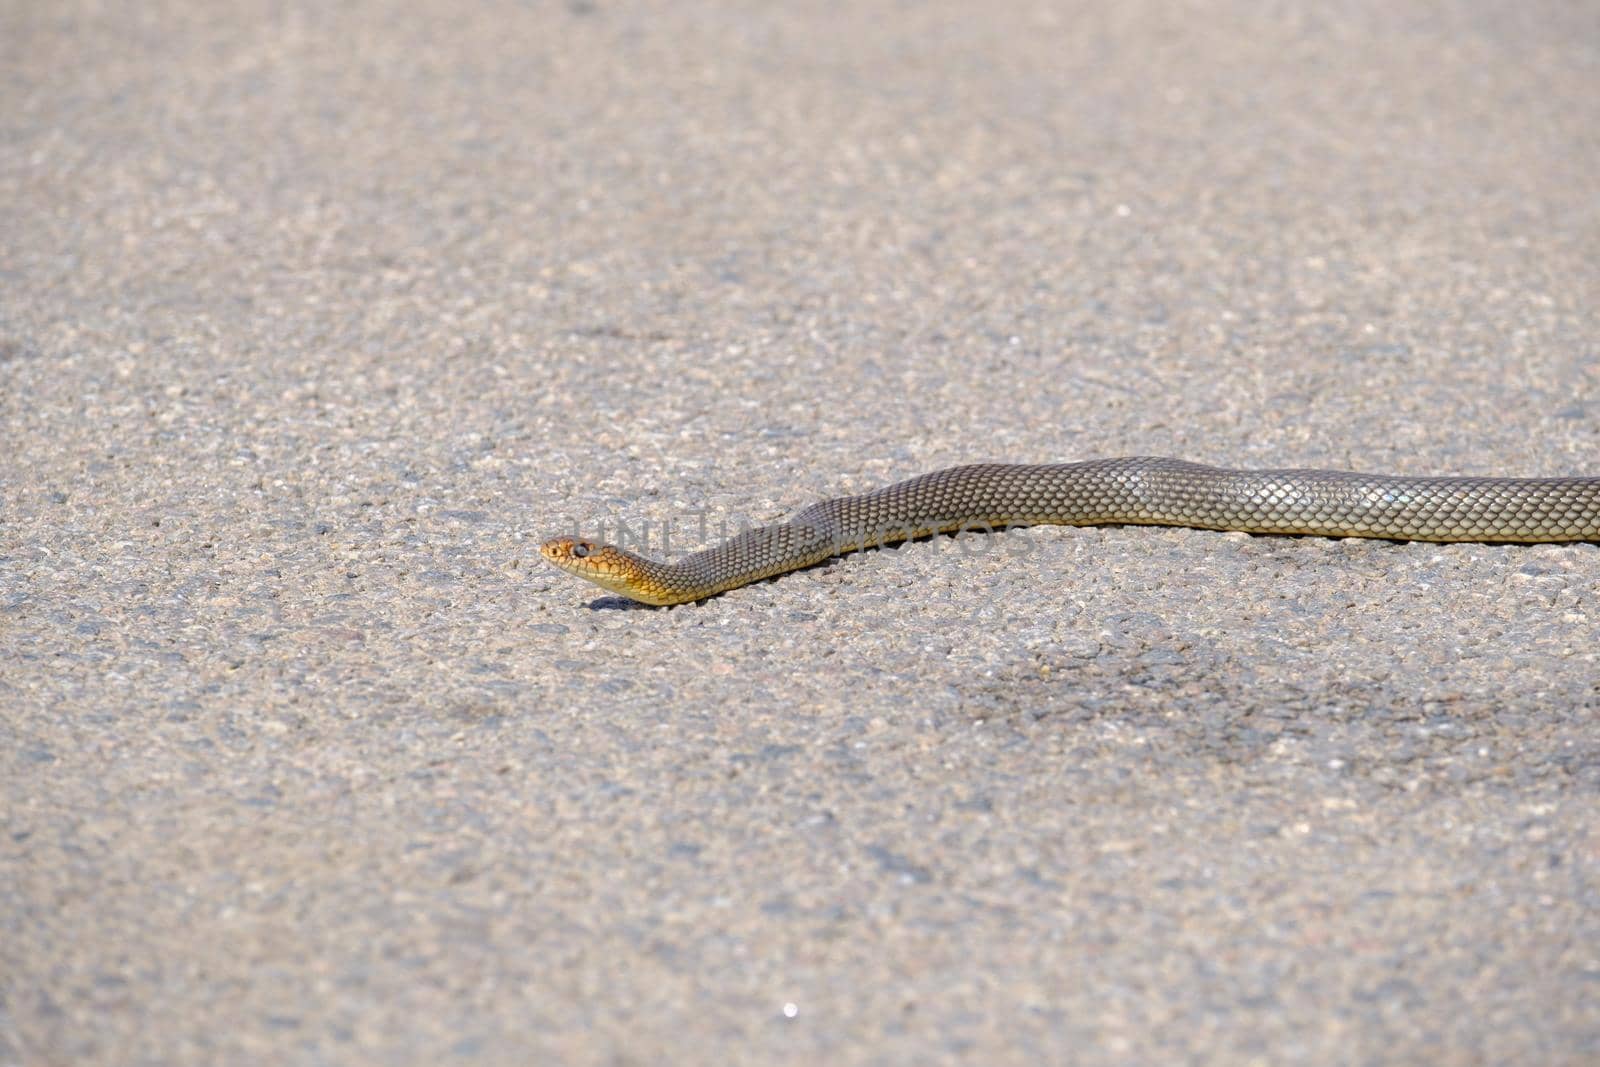 Portrait close up, small brown snake crawling on the road. Portrait - close up, small brown snake crawling on the road.